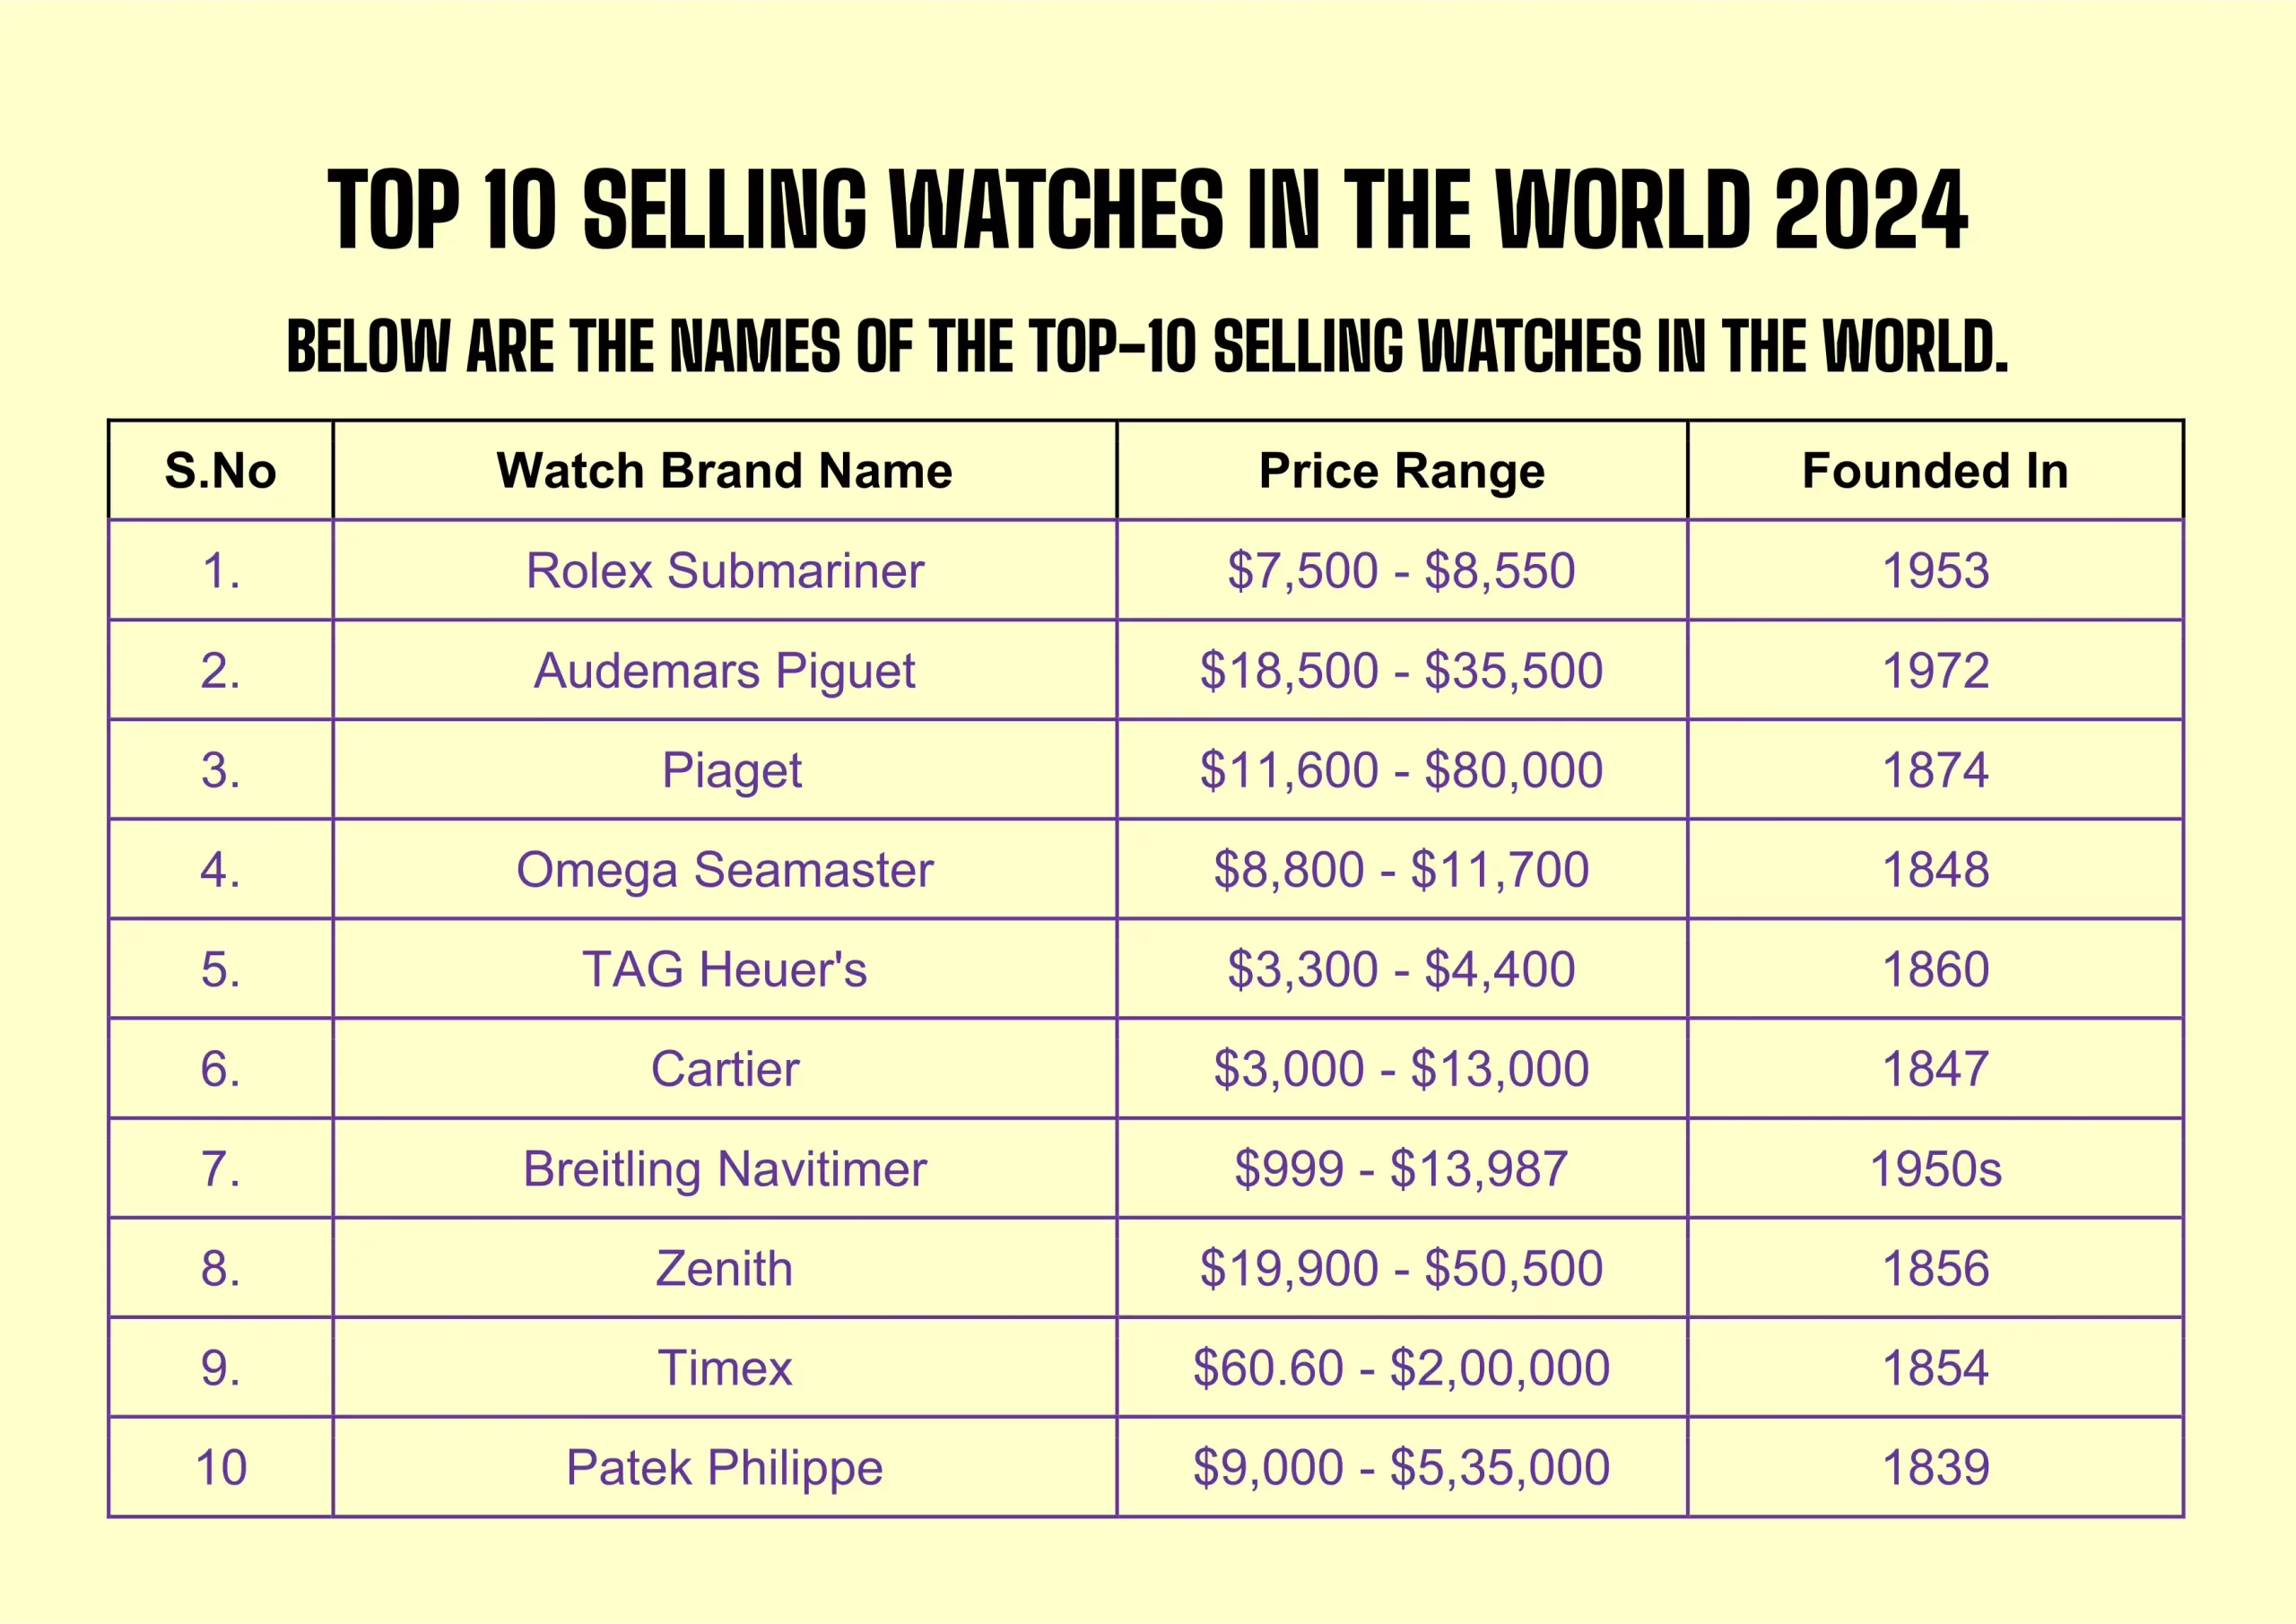 Top 10 Selling Watches In The World 2024